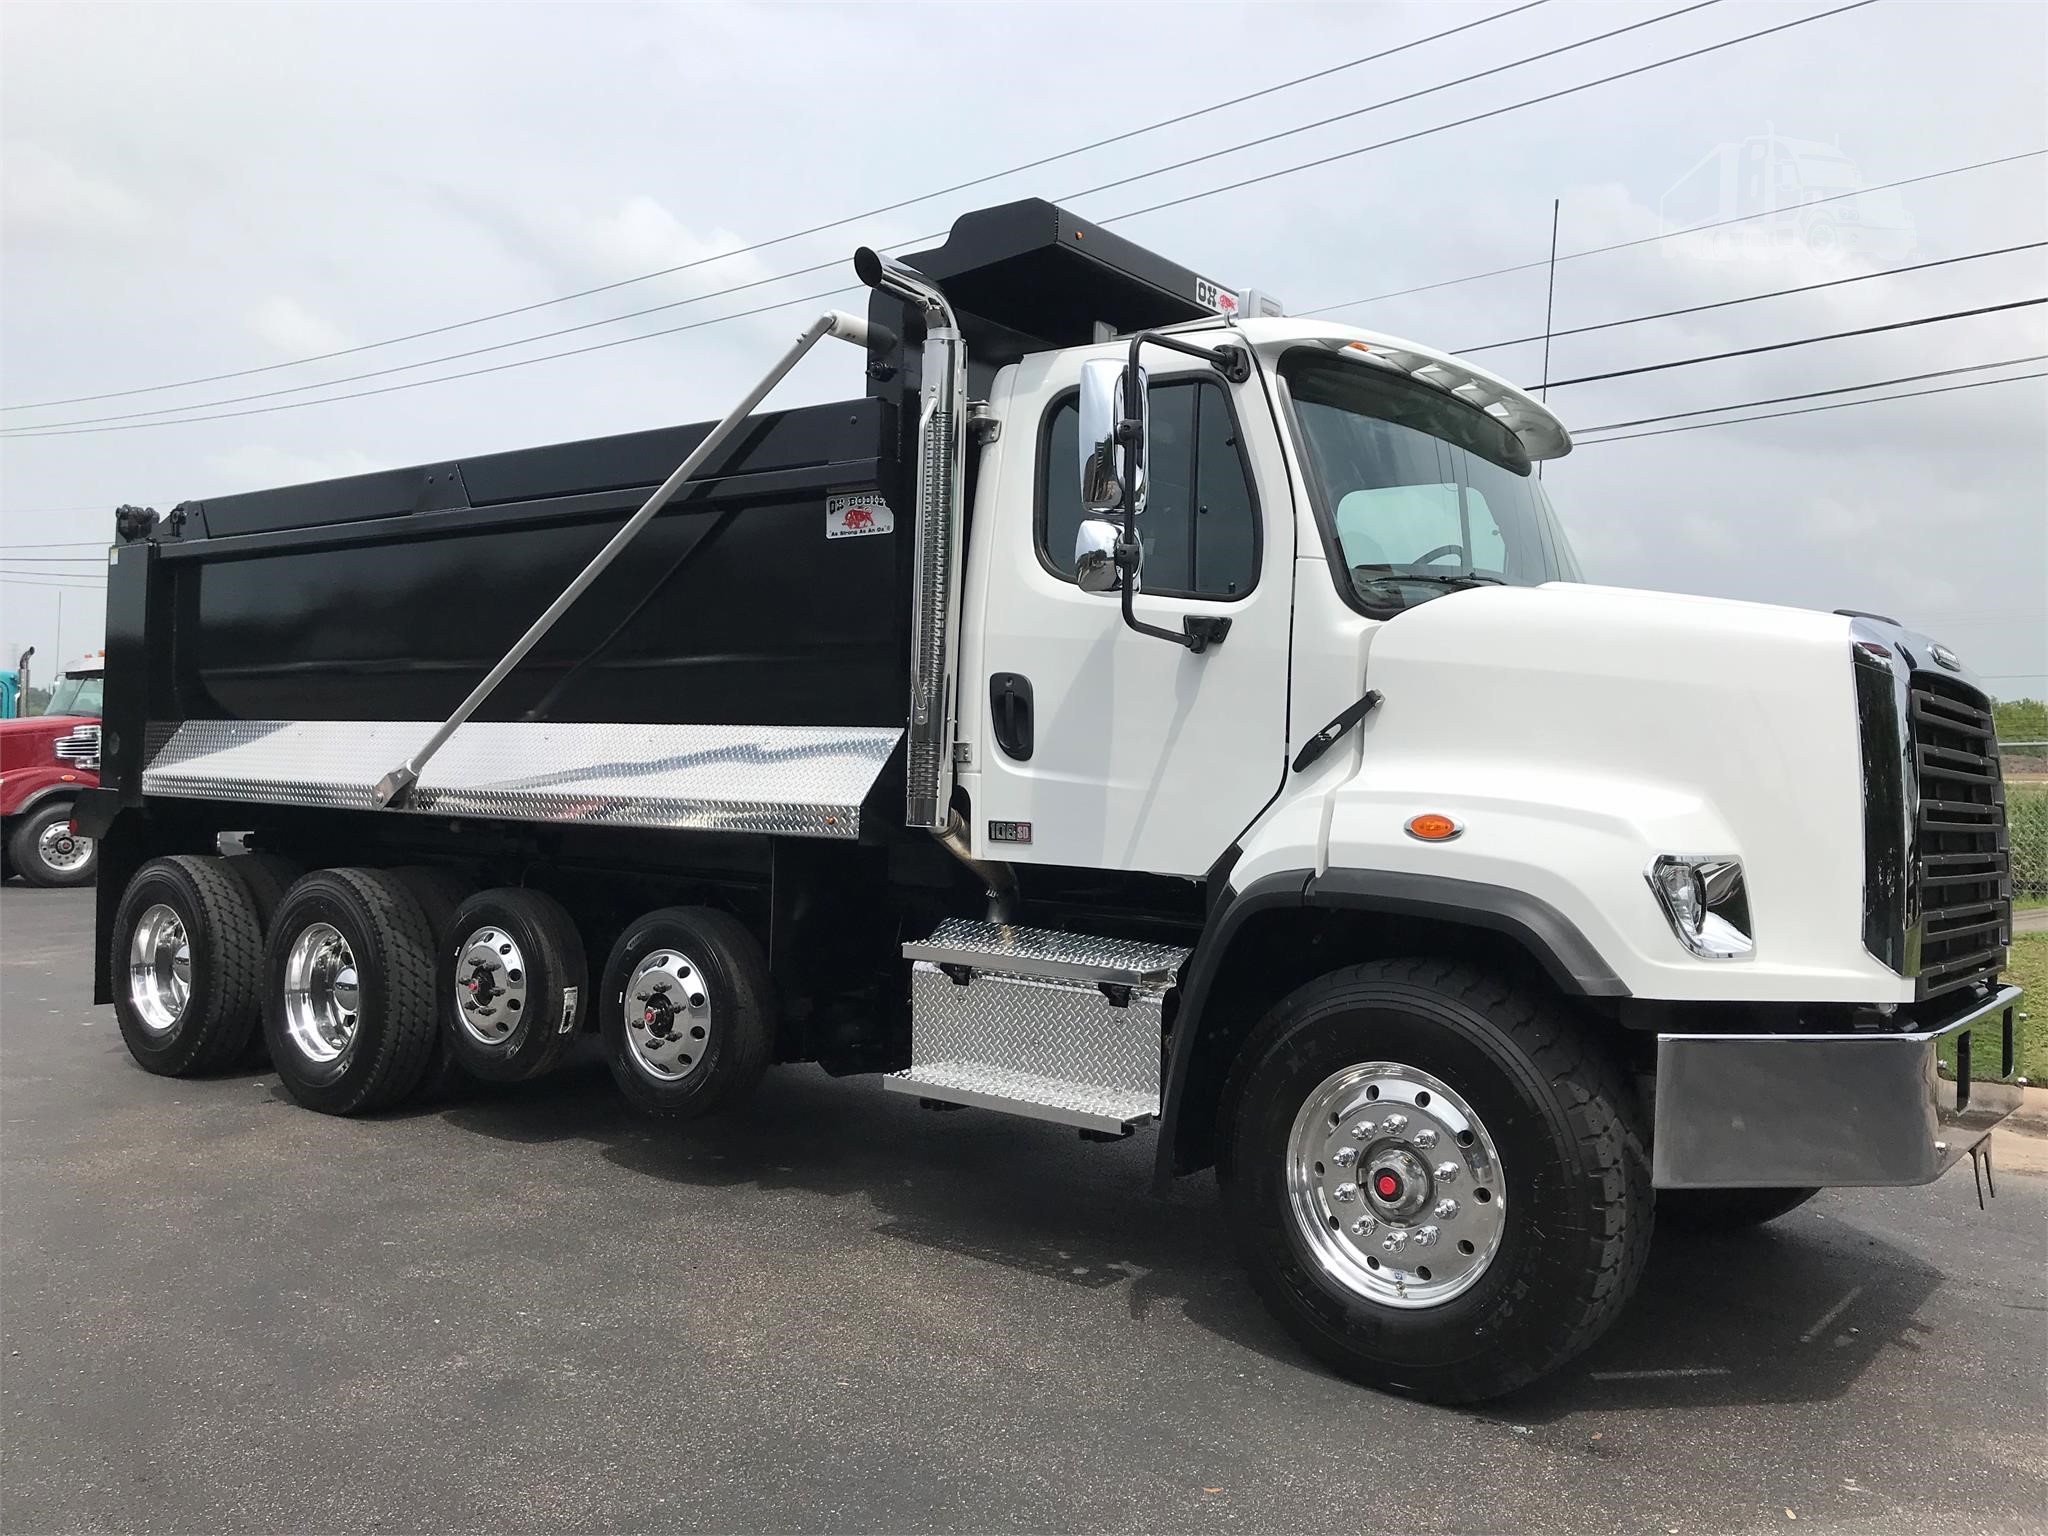 2022 FREIGHTLINER 108SD For Sale In Austin, Texas | www ...